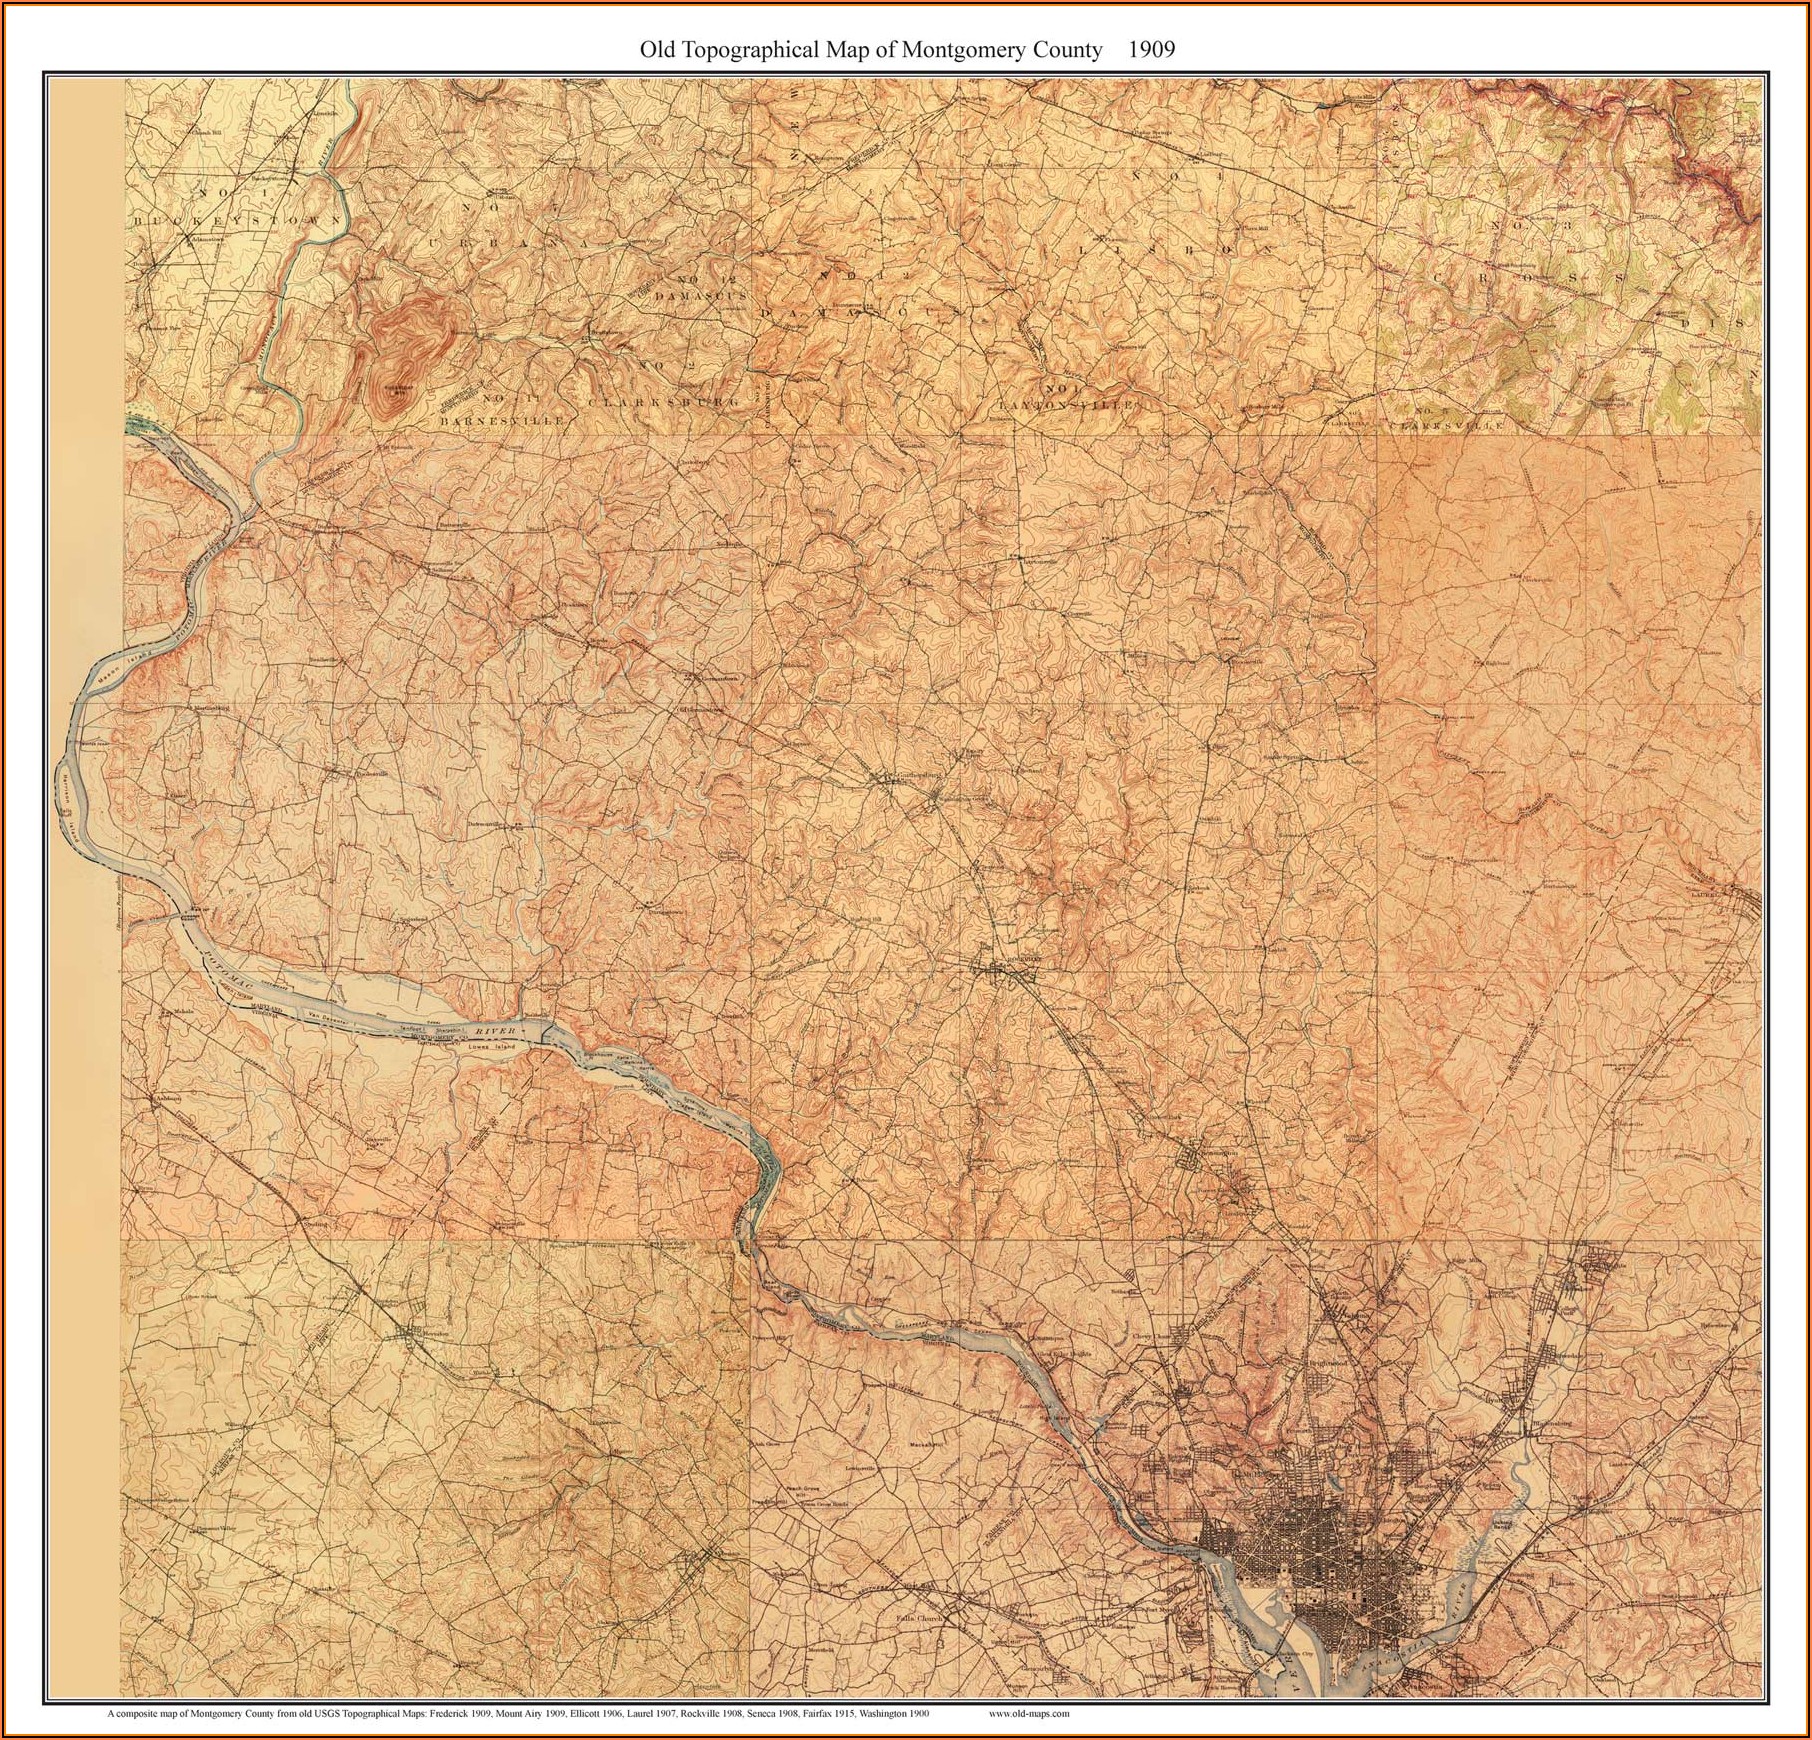 Old Topographic Maps Of Maryland